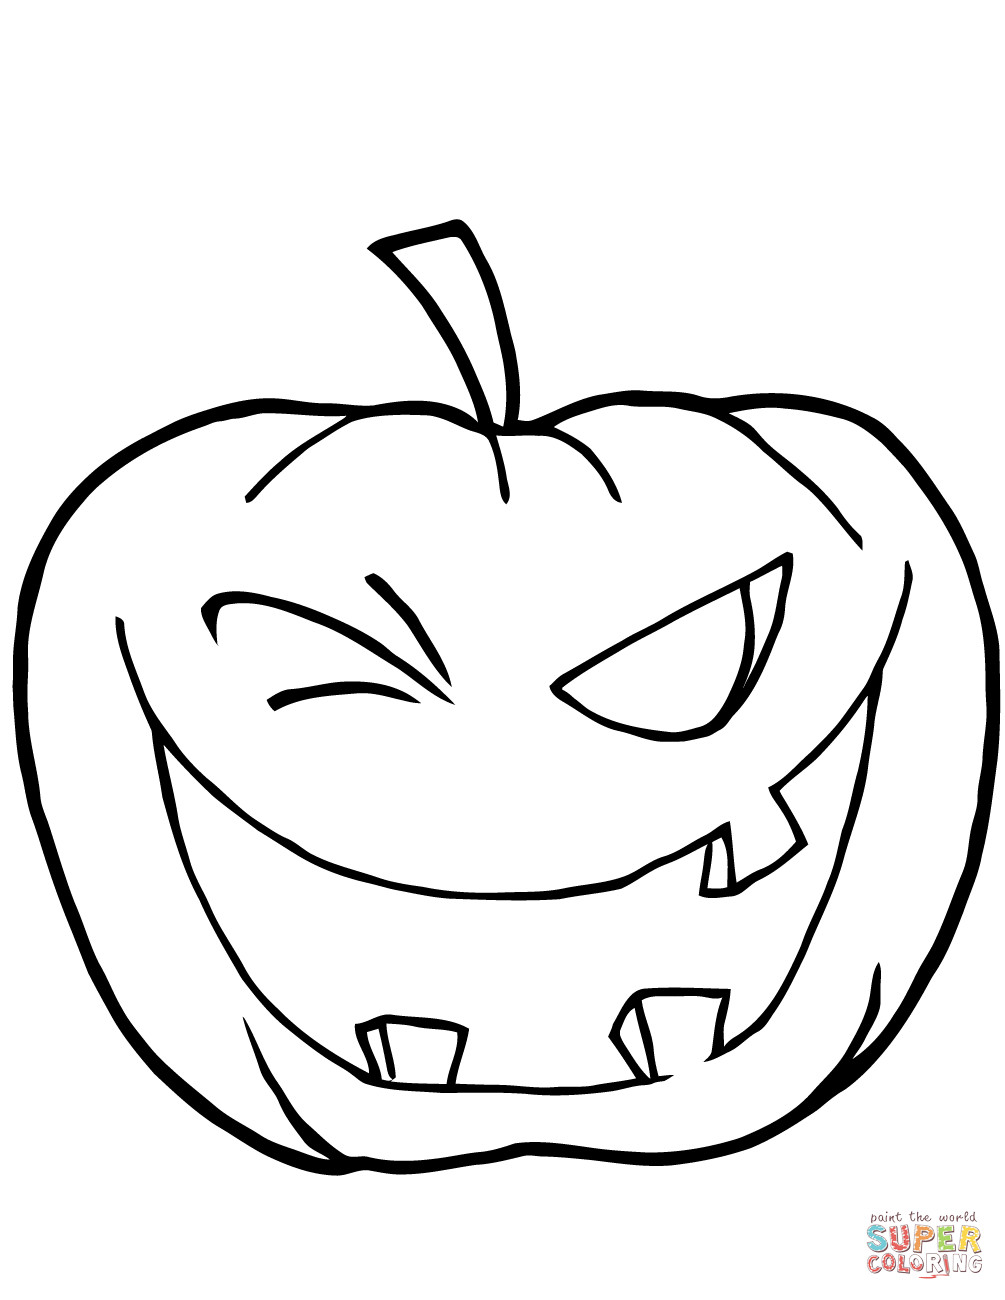 Best Free Printable Coloring Pages For Halloween Pumpkins from Halloween Pu...